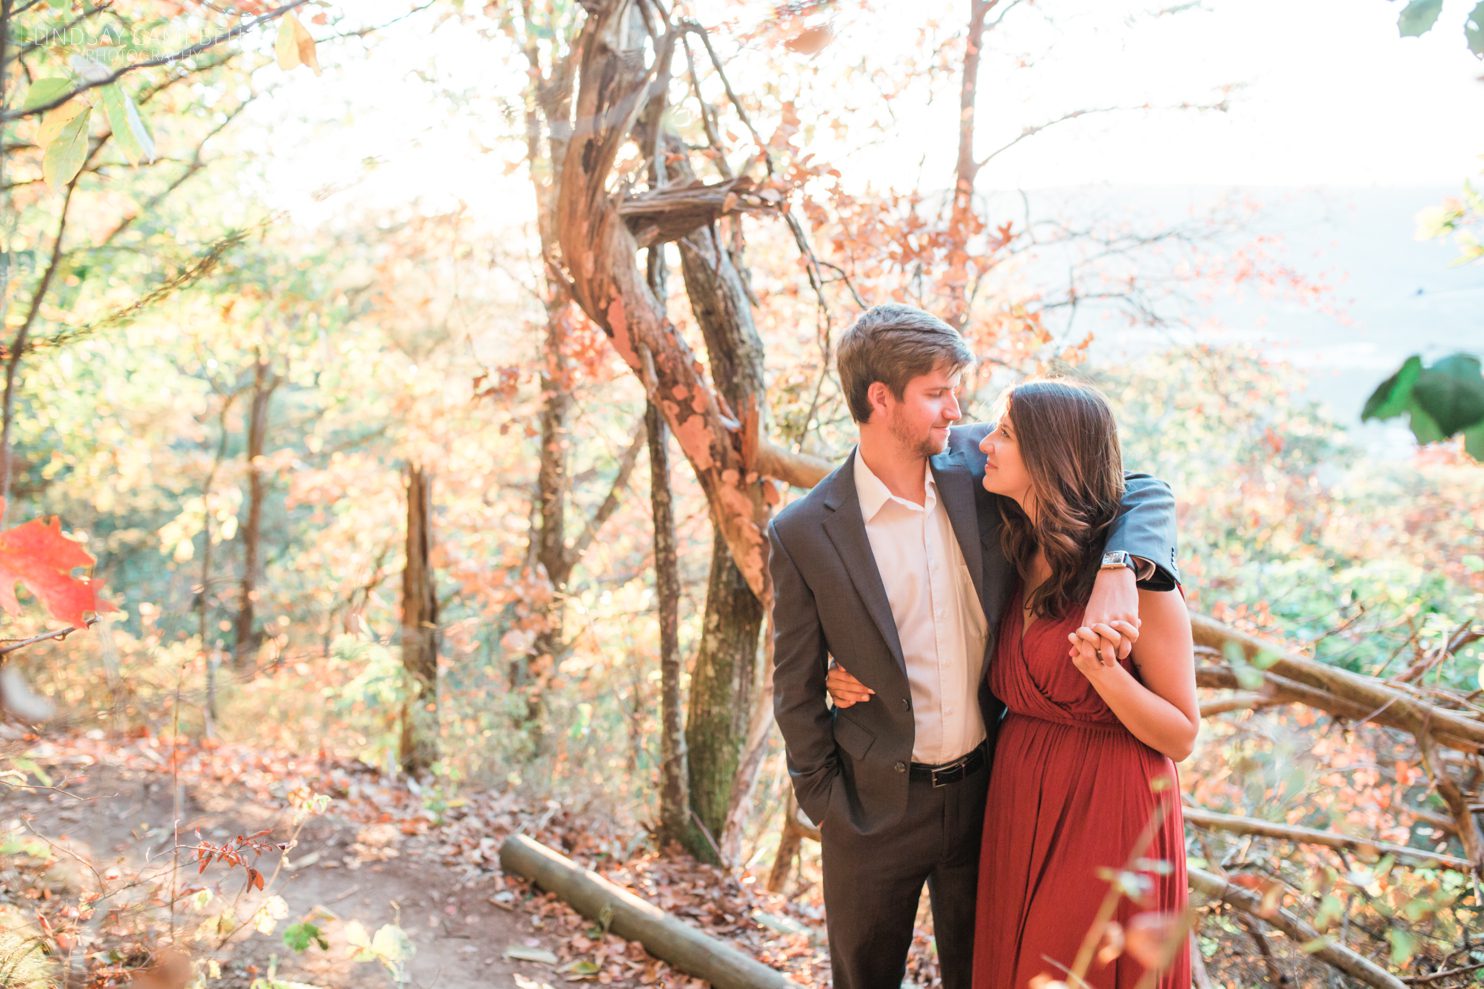 Kat-and-Tyler-Chattanooga-Engagement-Session-Lookout-Mountain-Engagement-photos-chattanooga-wedding-photographer_0035 Kat + Tyler's Lifestyle Engagement Session in Chattanooga